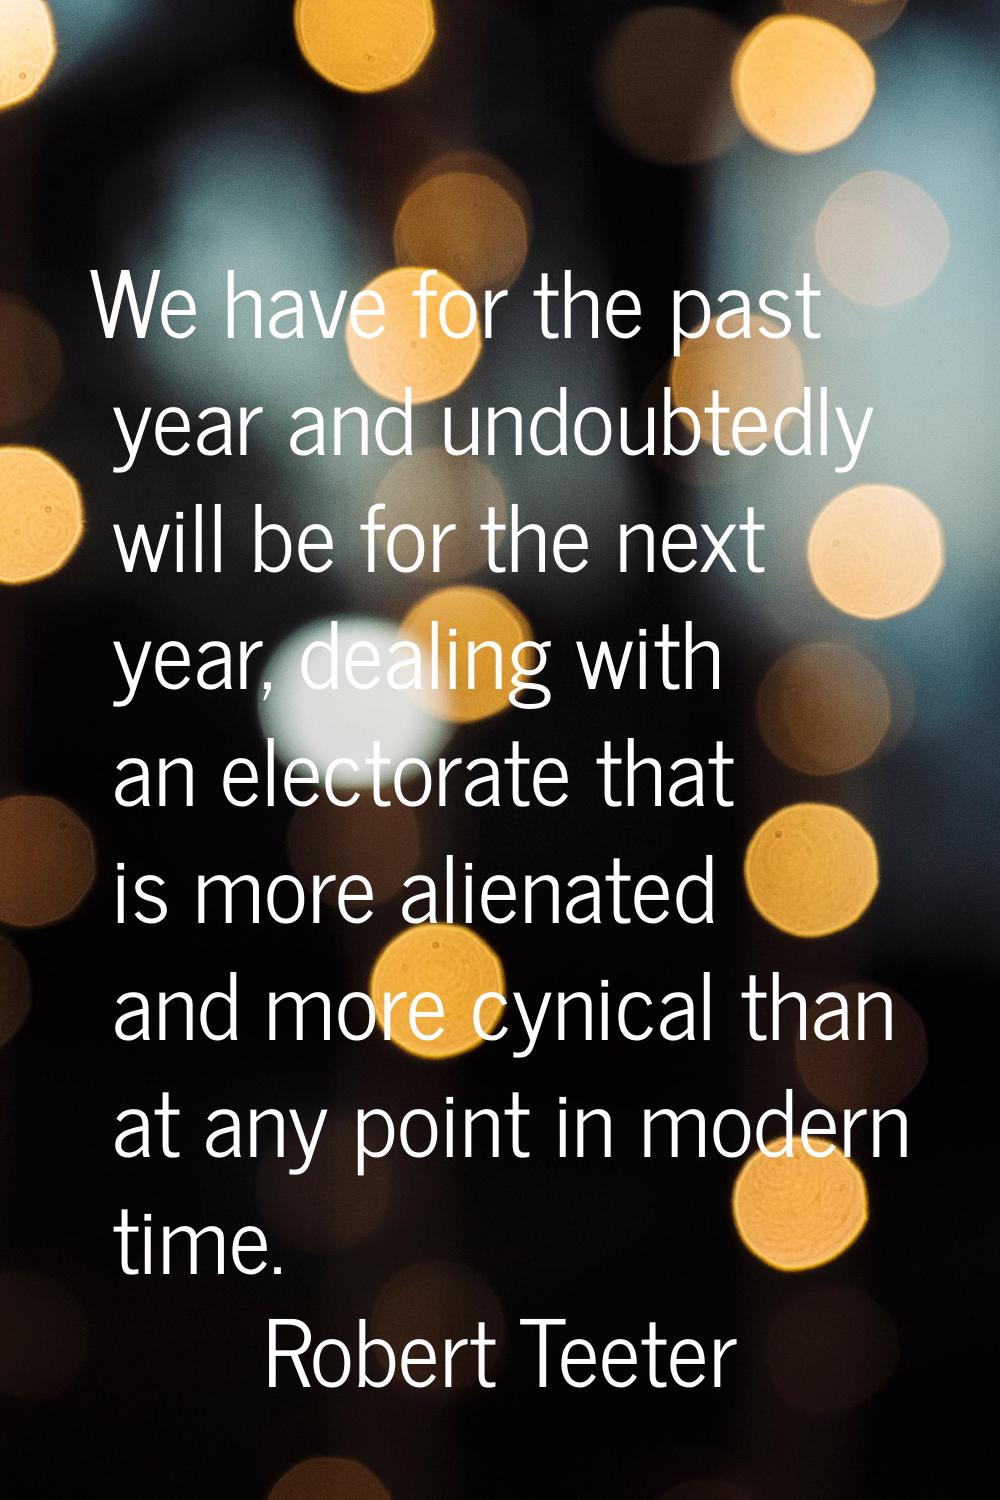 We have for the past year and undoubtedly will be for the next year, dealing with an electorate tha